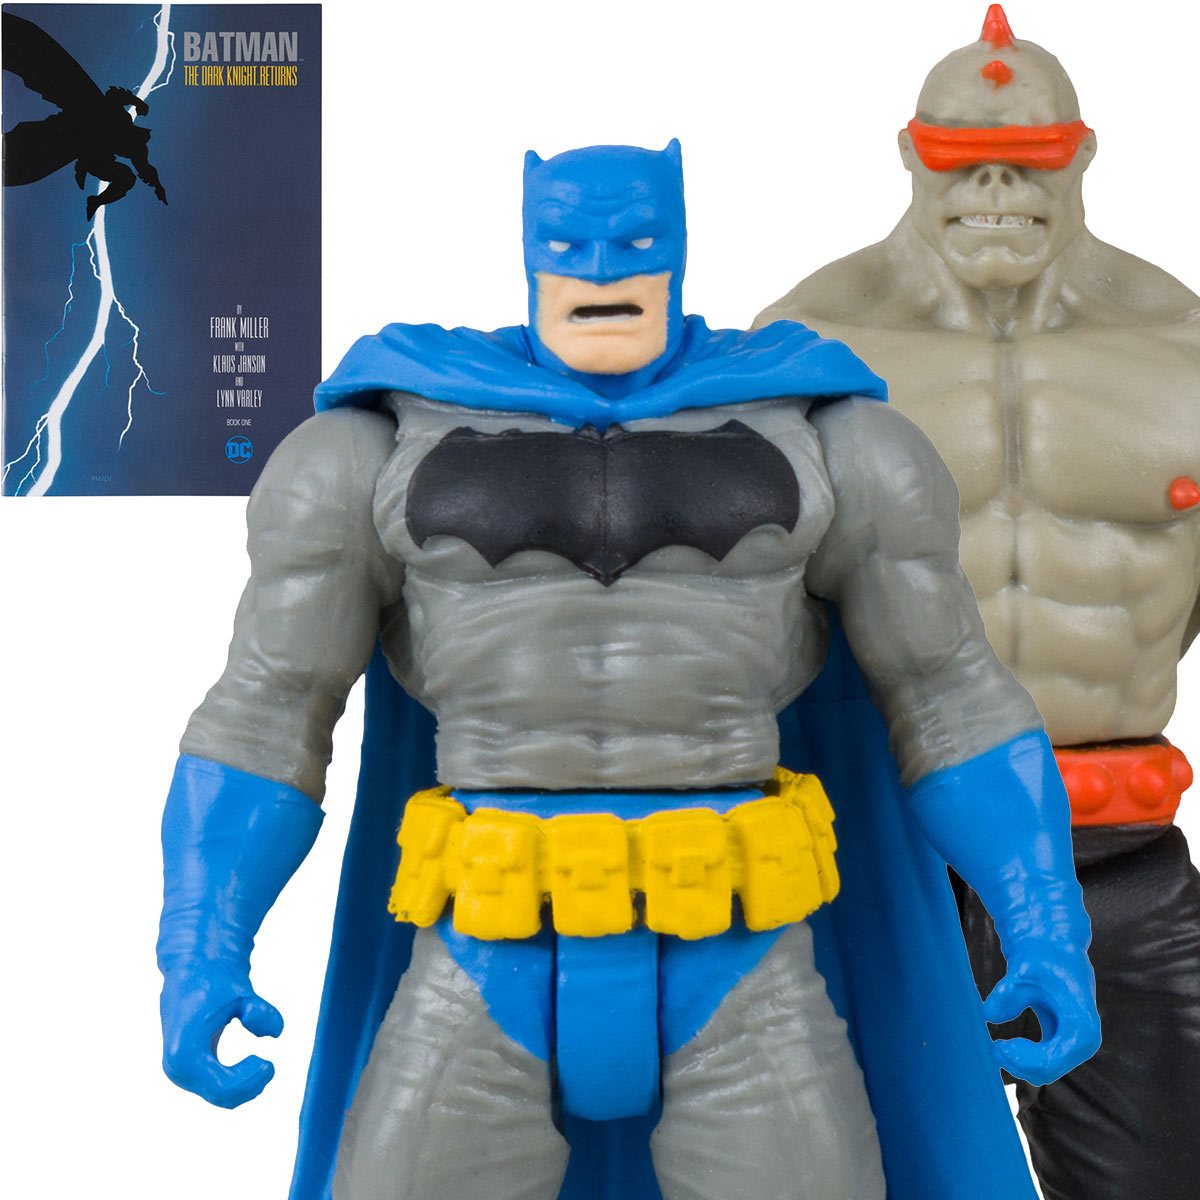 Batman 12-inch Action Figure 3-Pack with Robin, Batman, Nightwing, Kids  Toys for Boys Aged 3 and Up